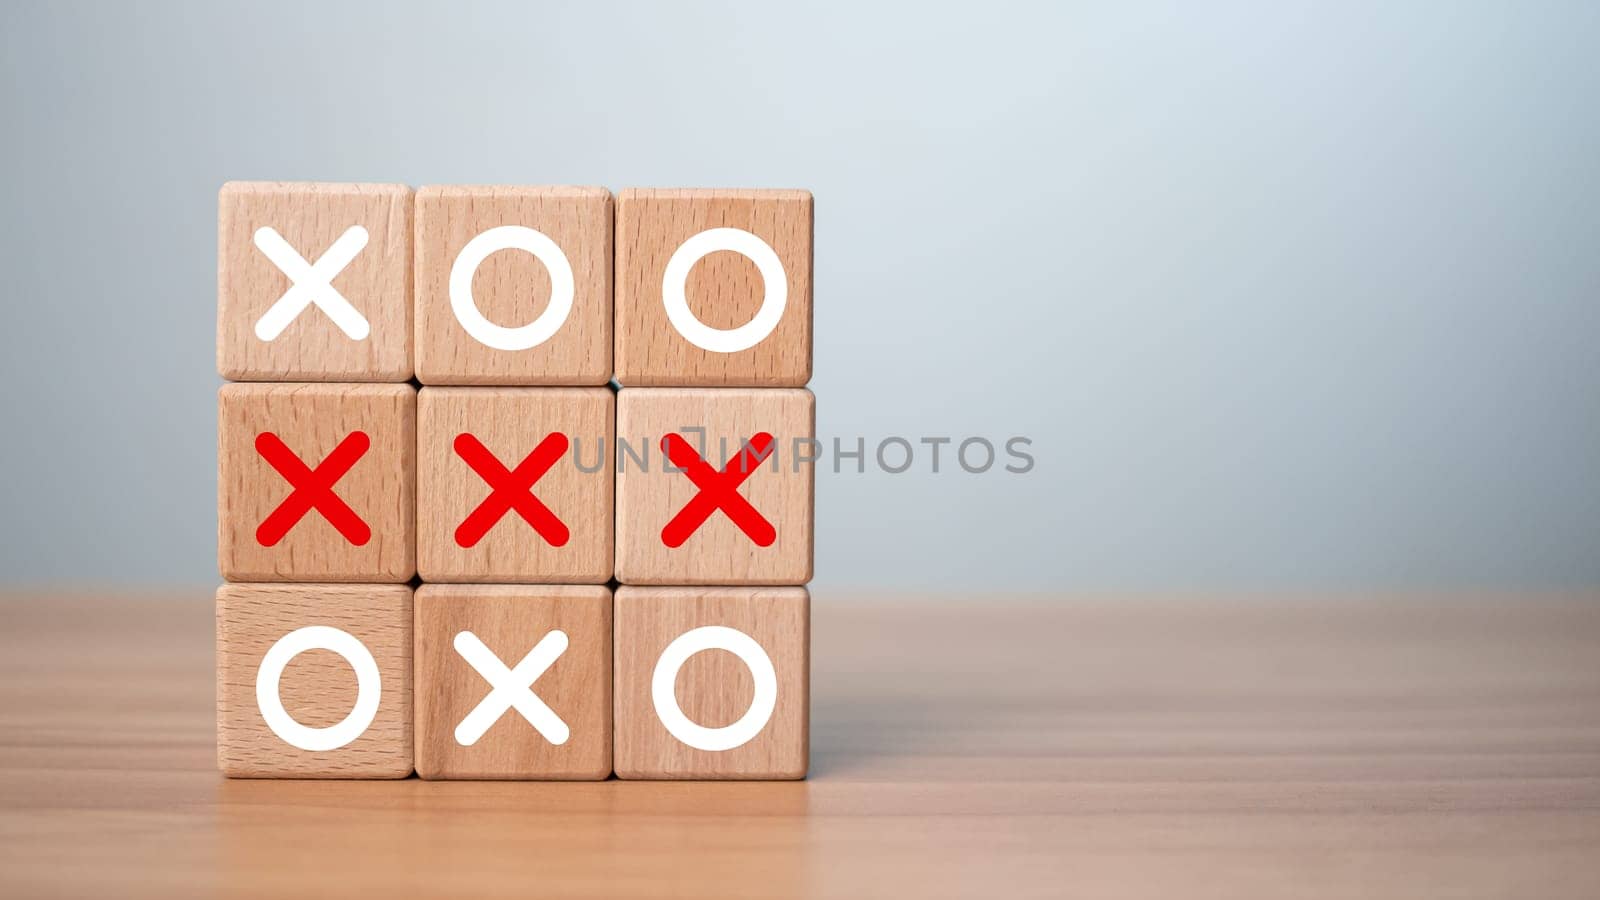 Tic Tac Toe game made of wooden blocks. Front view of wooden OX game on wooden table.Business marketing strategy planning concept. Business competitor assessment concept.